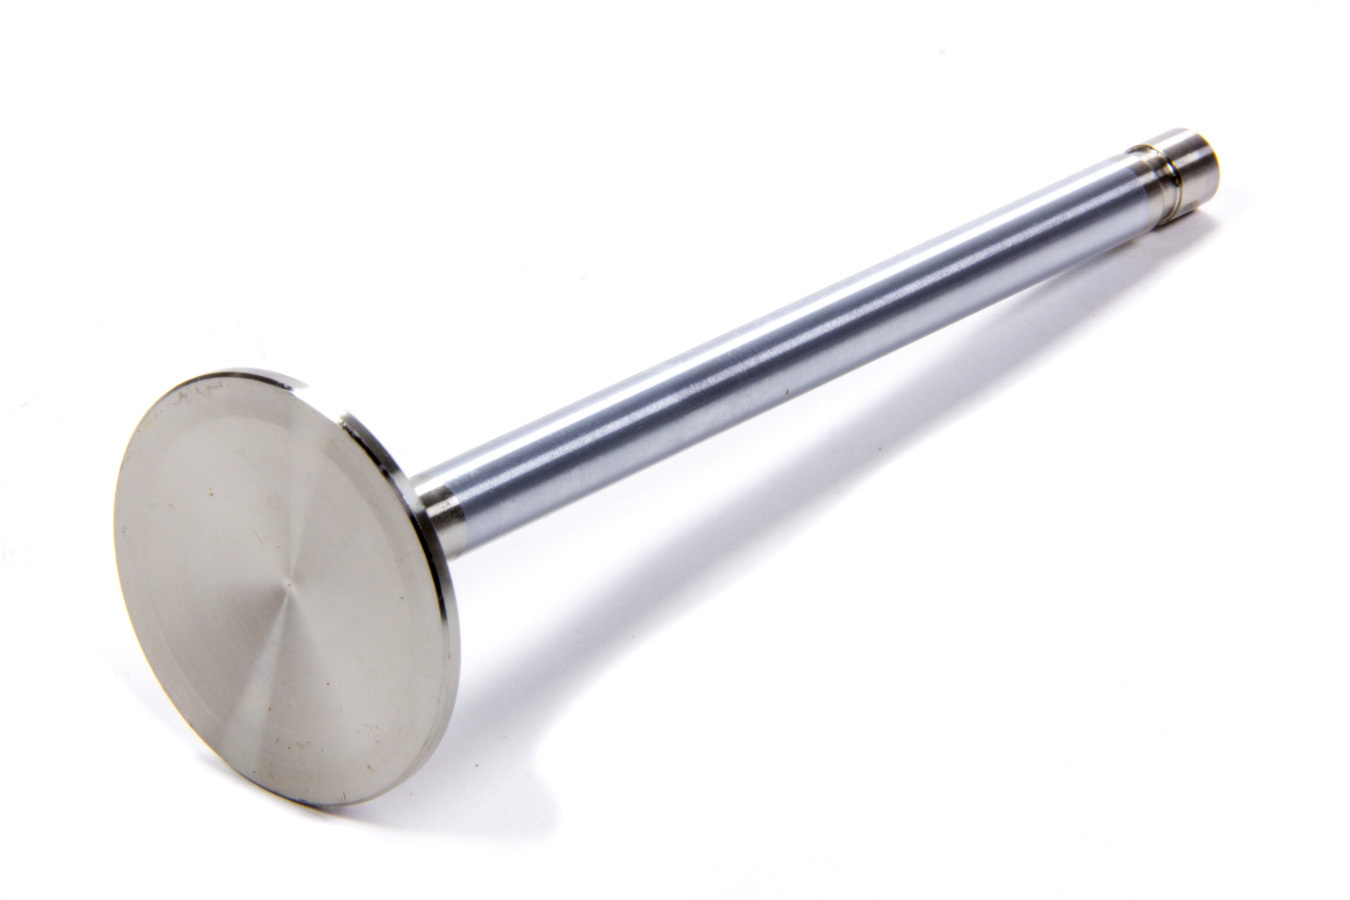 Brodix BR91580 Exhaust Valve, 1.580 in Head, 11/32 in Valve Stem, 6.090 in Long, Stainless, Small Block Chevy, Each